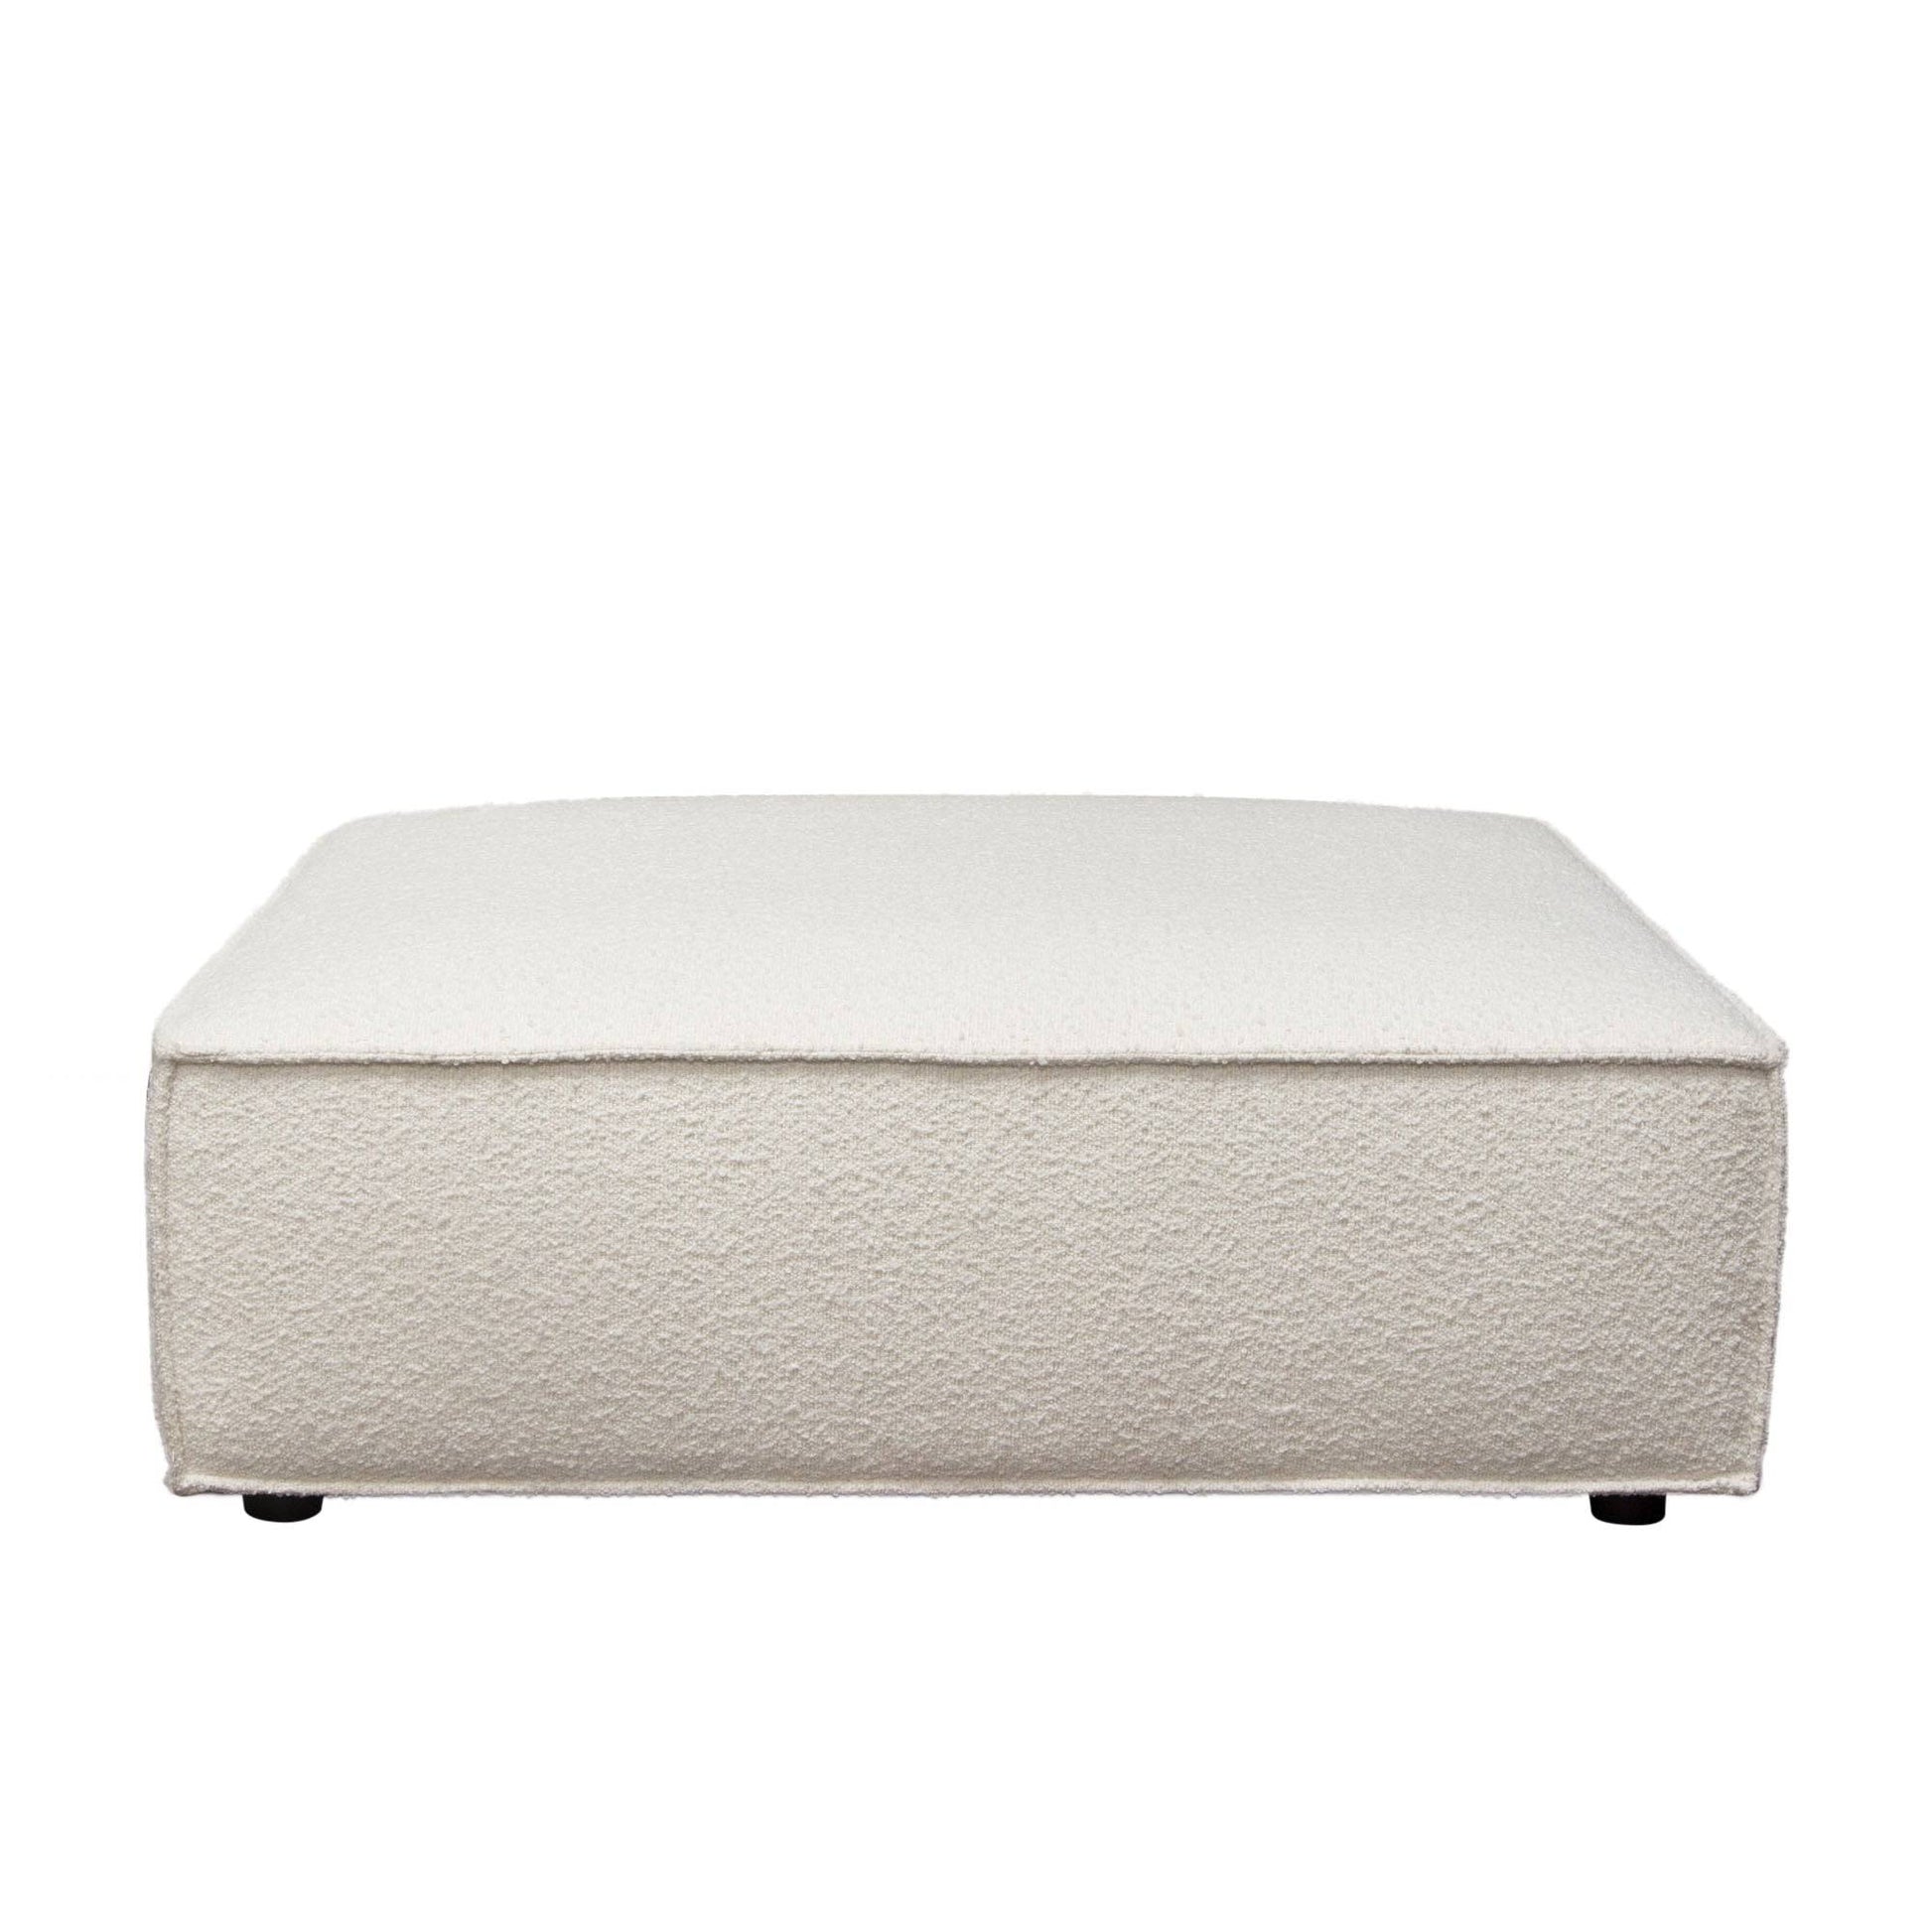 Cara Square Modular Lounger in Ivory Boucle Fabric w/ Moveable, Non-Skid Backrest - Elite Maison